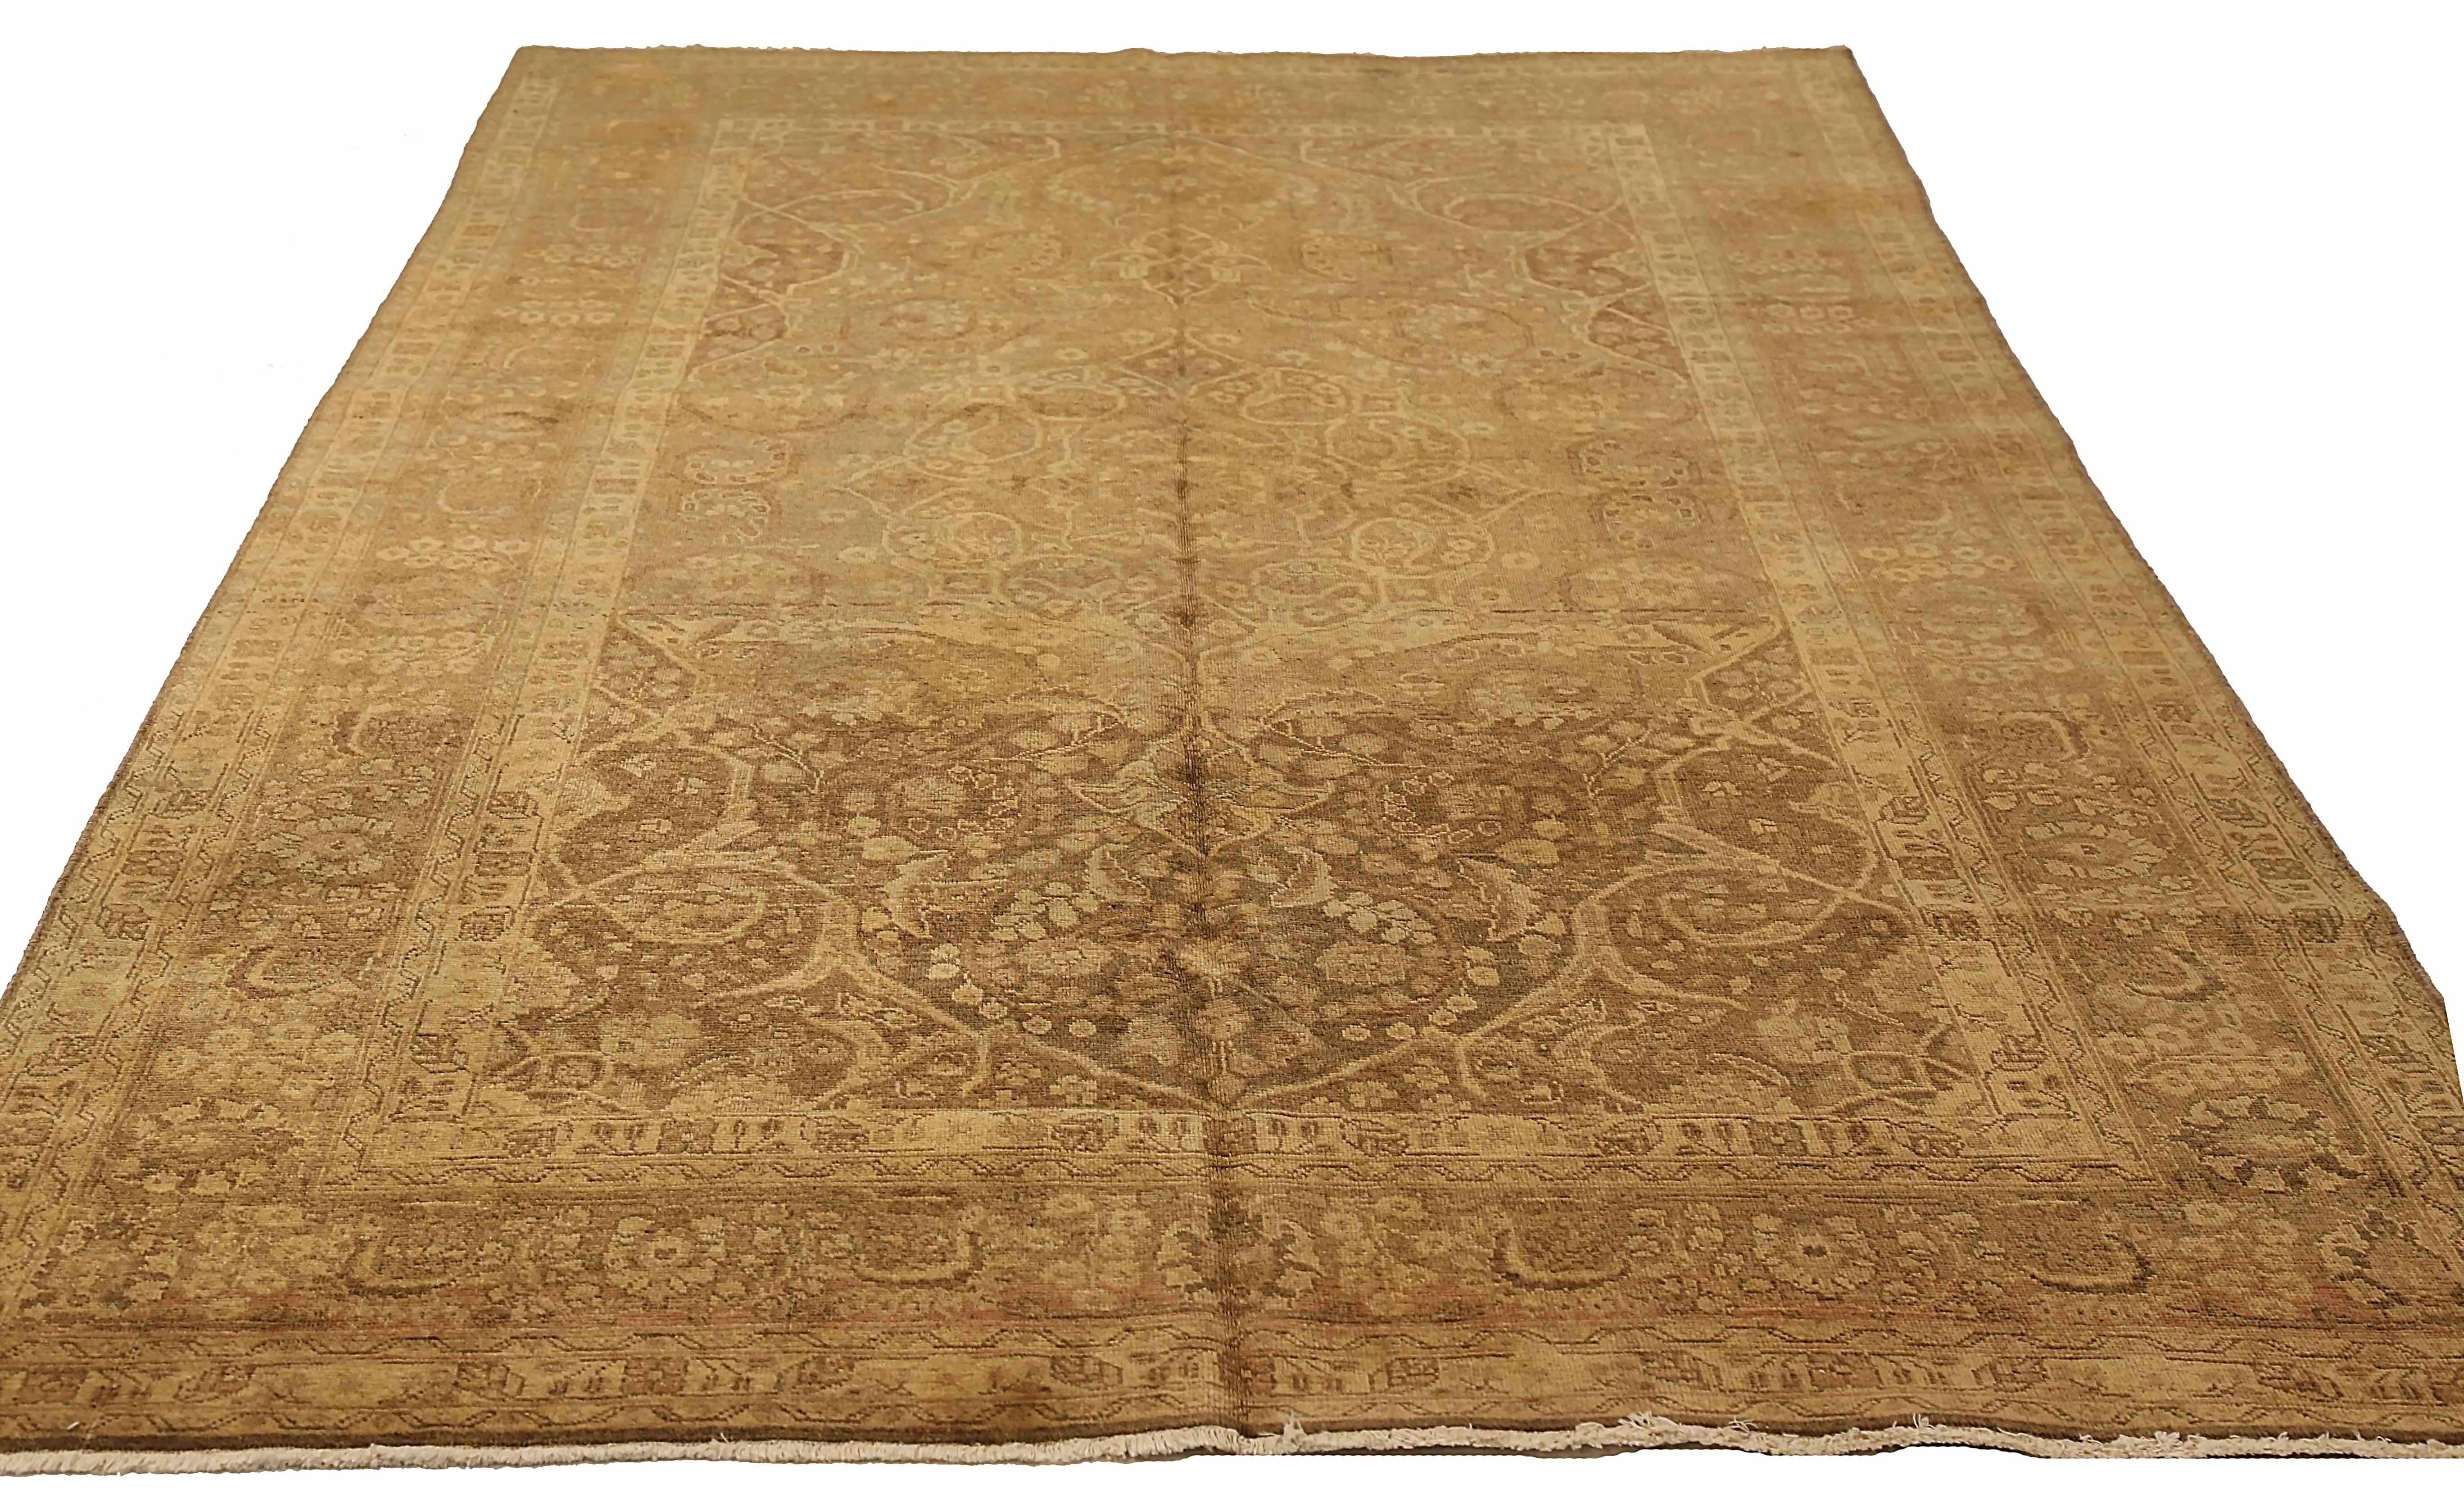 Antique Persian area rug handwoven from the finest sheep’s wool. It’s colored with all-natural vegetable dyes that are safe for humans and pets. It’s a traditional Tabriz design handwoven by expert artisans.It’s a lovely area rug that can be